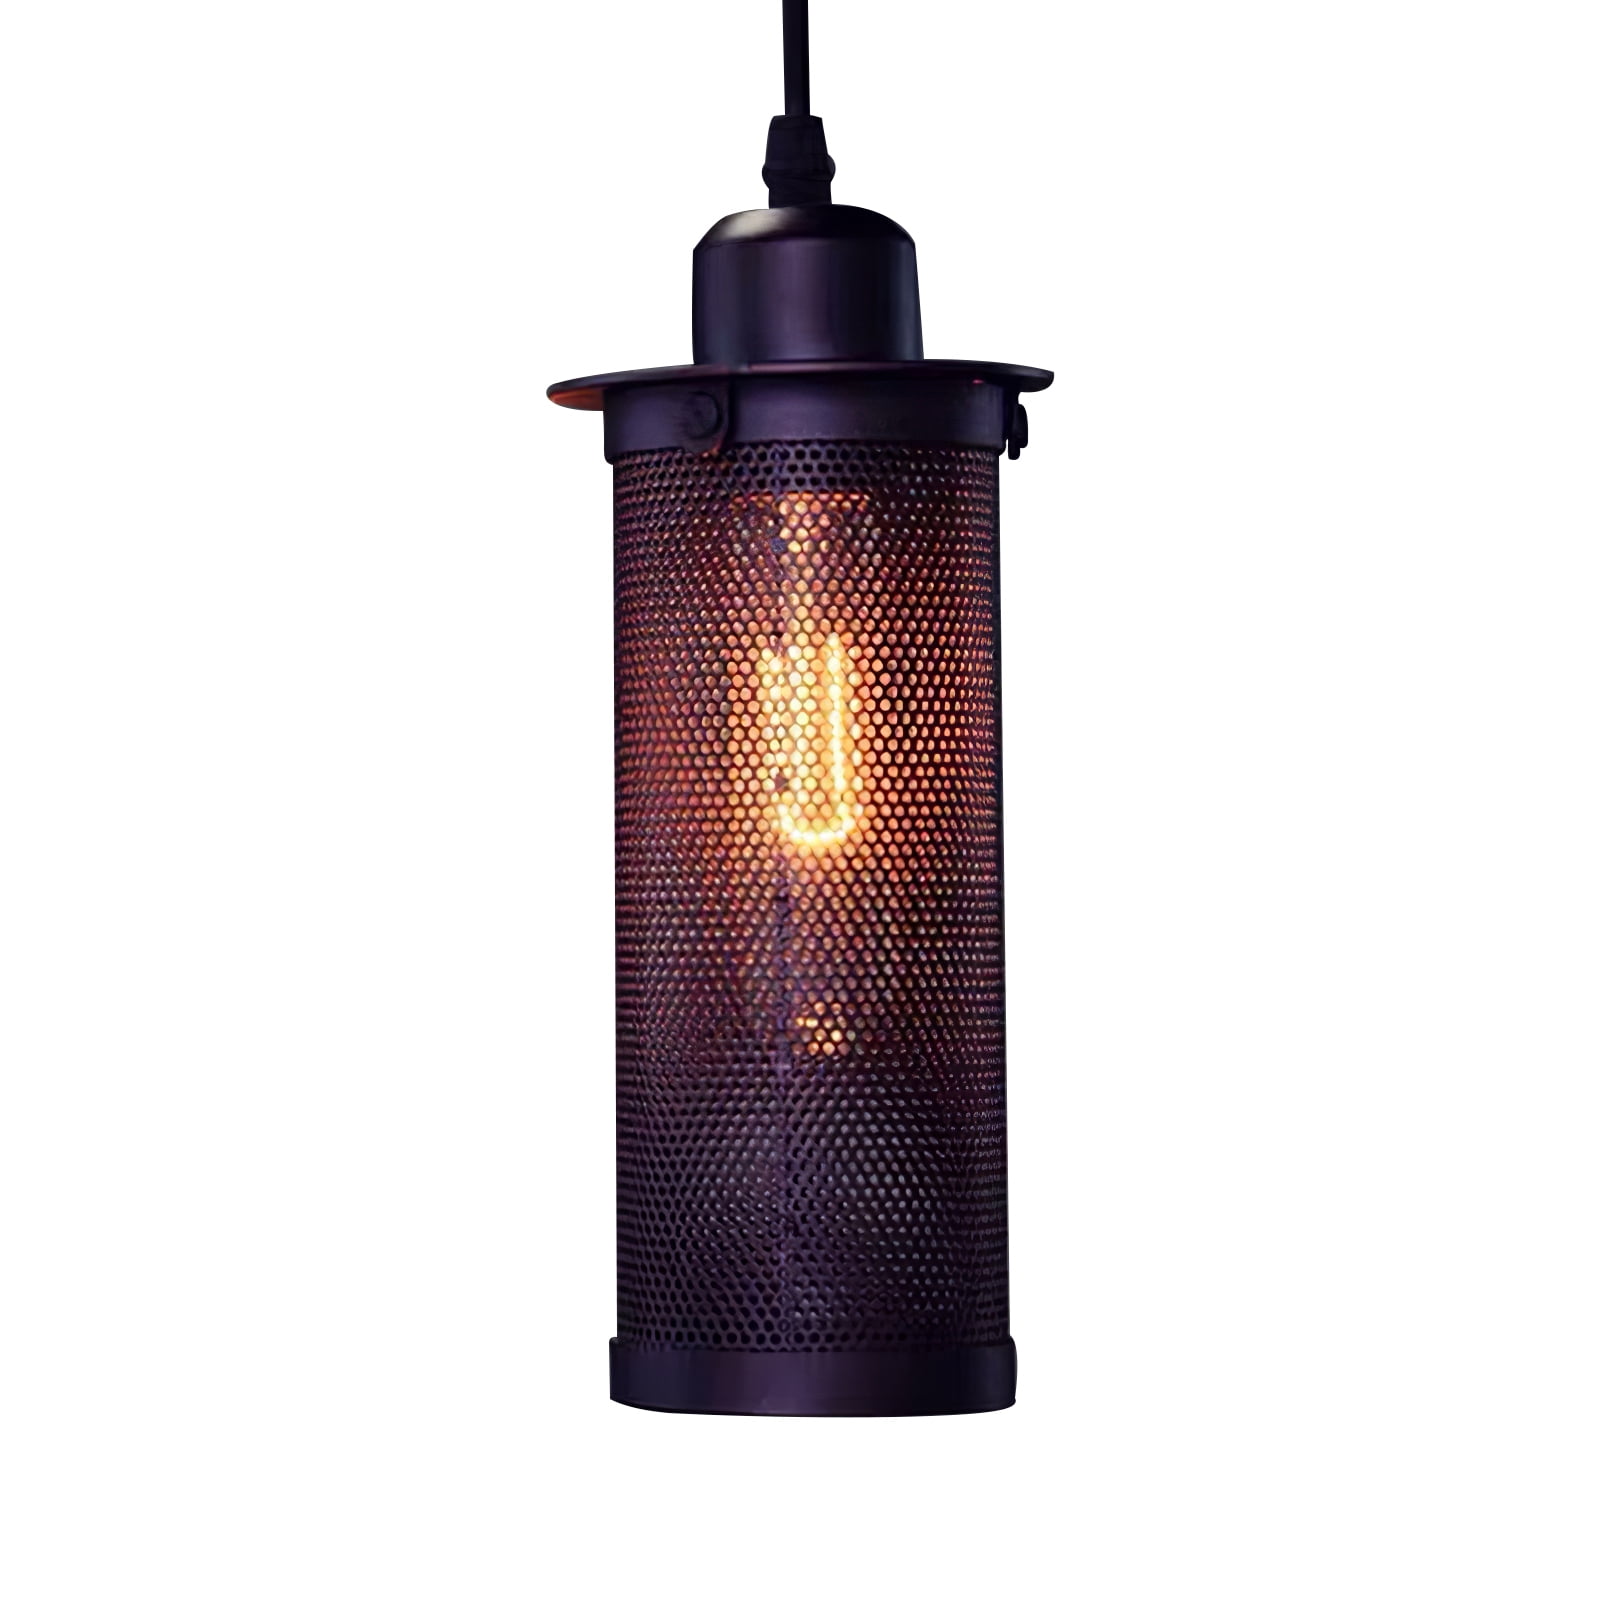 Retro Industrial Pendant Light Vintage Ceiling Lamp Shade Cafe Hanging Fixture 